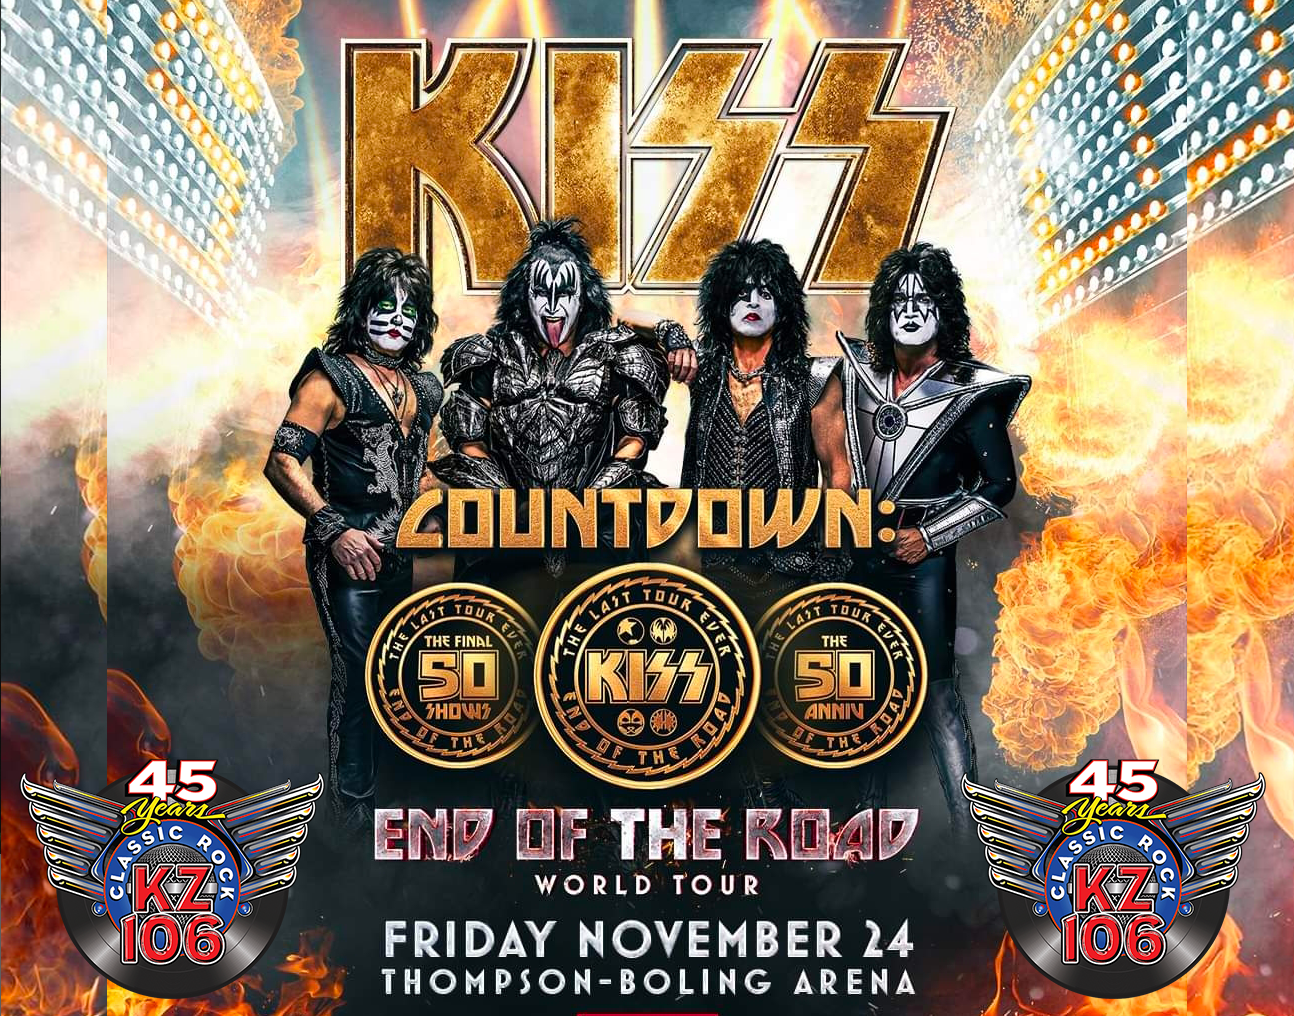 A KISS memory of a lifetime for the Knoxville Nov 24th show